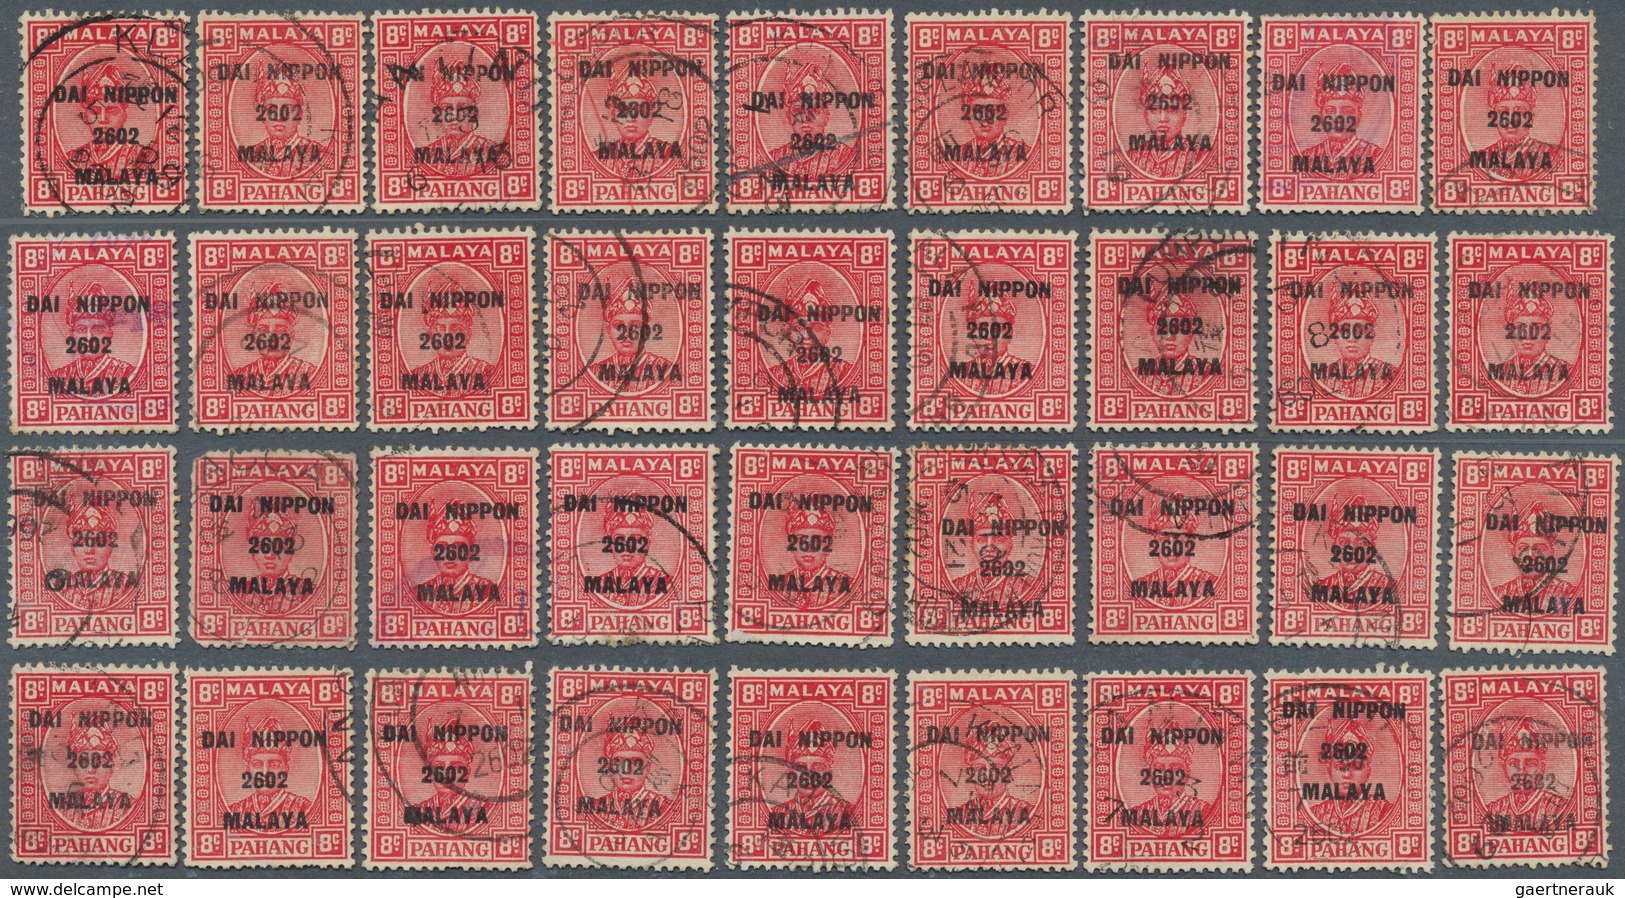 22943 Japanische Besetzung  WK II - Malaya: General issues, Pahang, 1942, ovpts. T16 resp. T2 mint and use